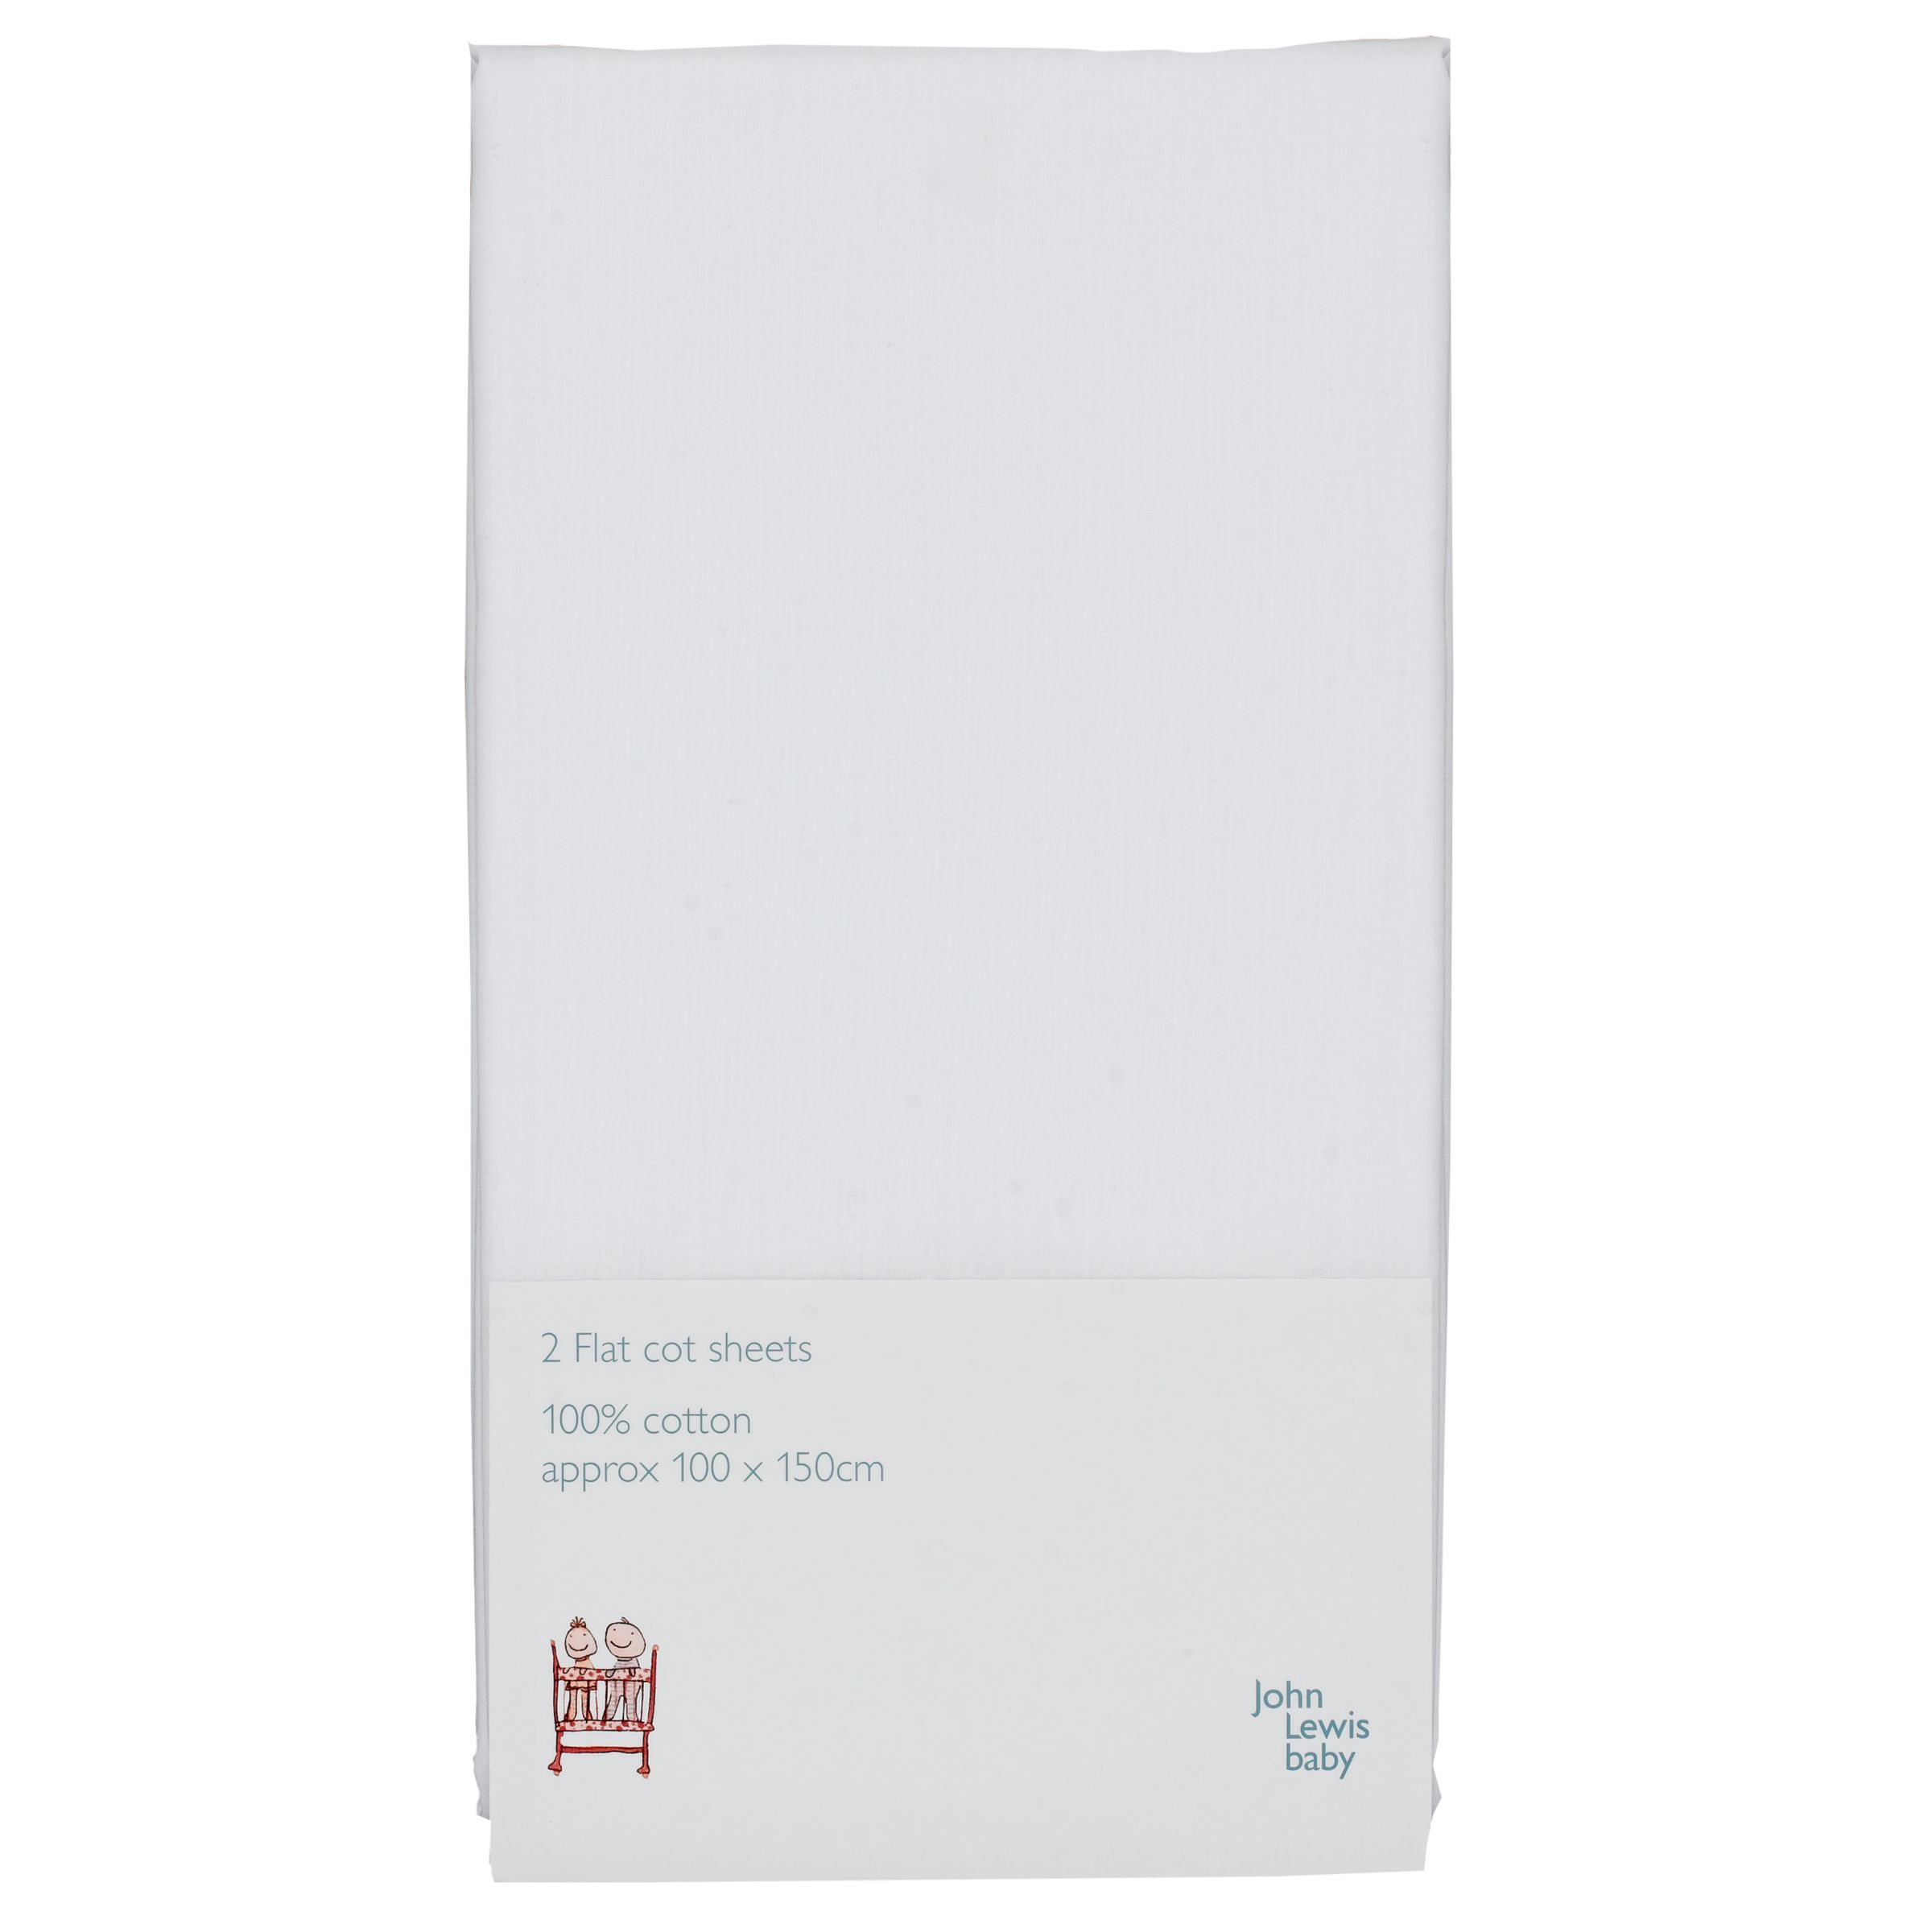 Flat Cot Sheet, Pack of 2, White